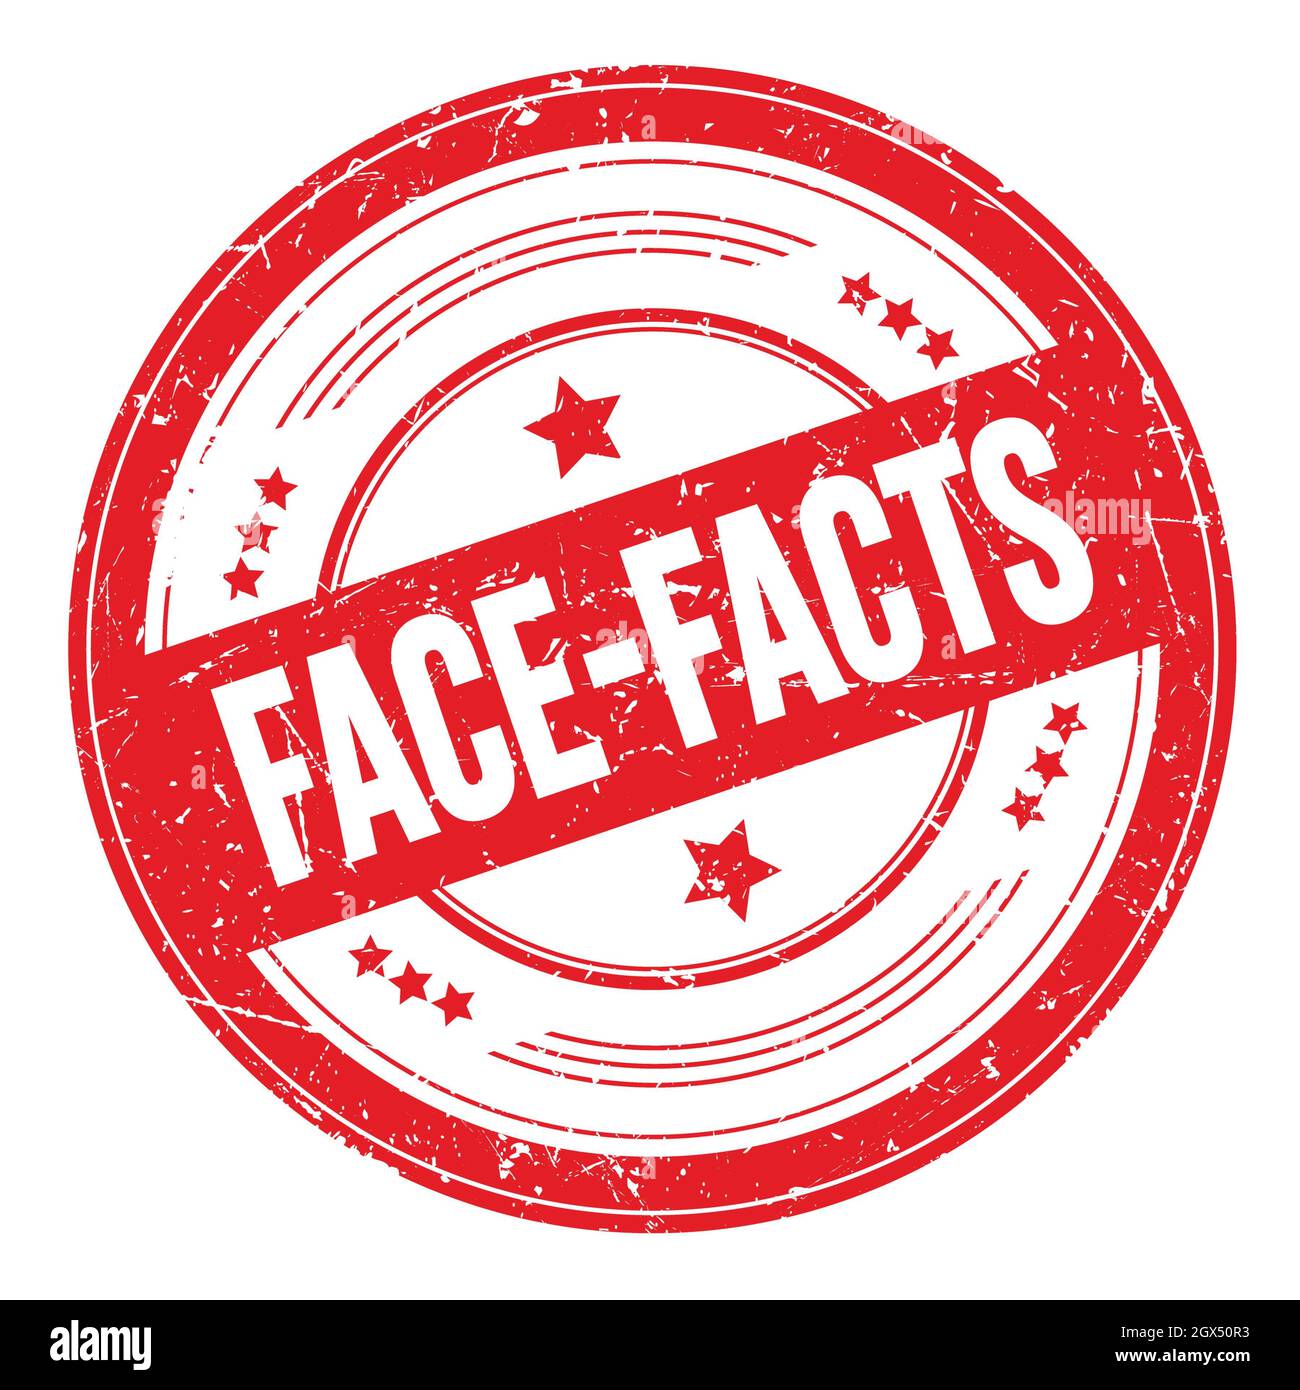 FACE-FACTS text on red round grungy texture stamp. Stock Photo